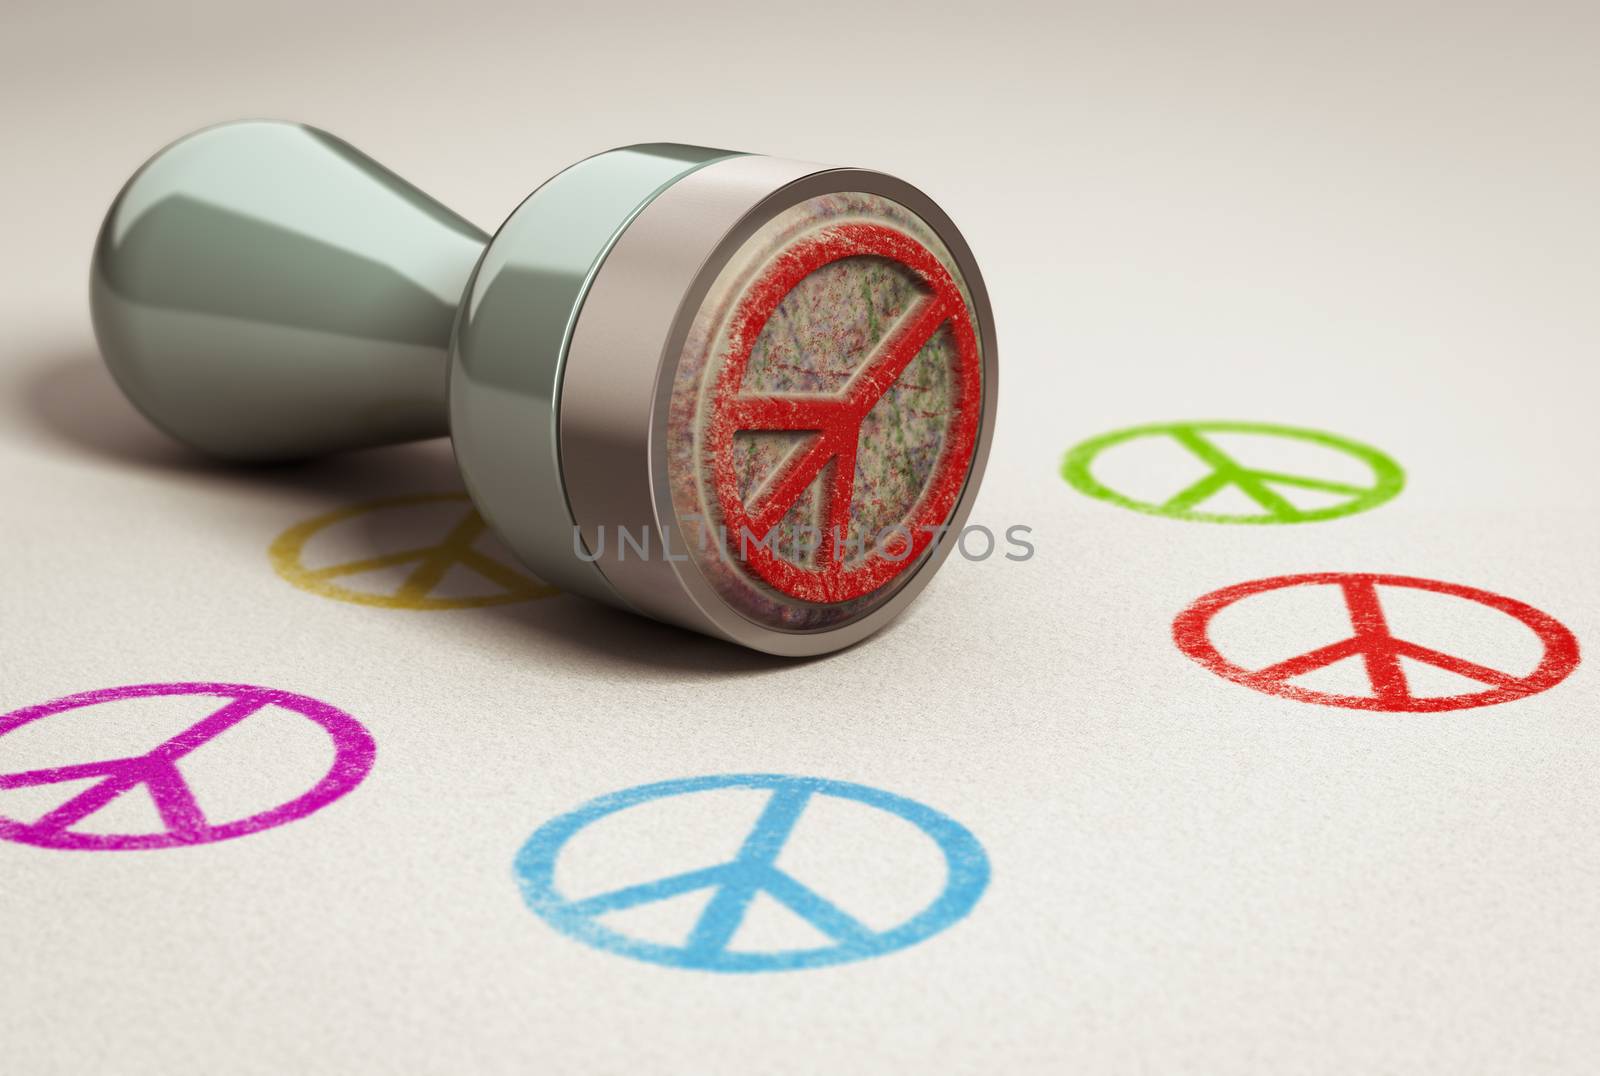 Rubber stamp over paper background with peace and love symbol printed on it. concept image for illustration of anti war